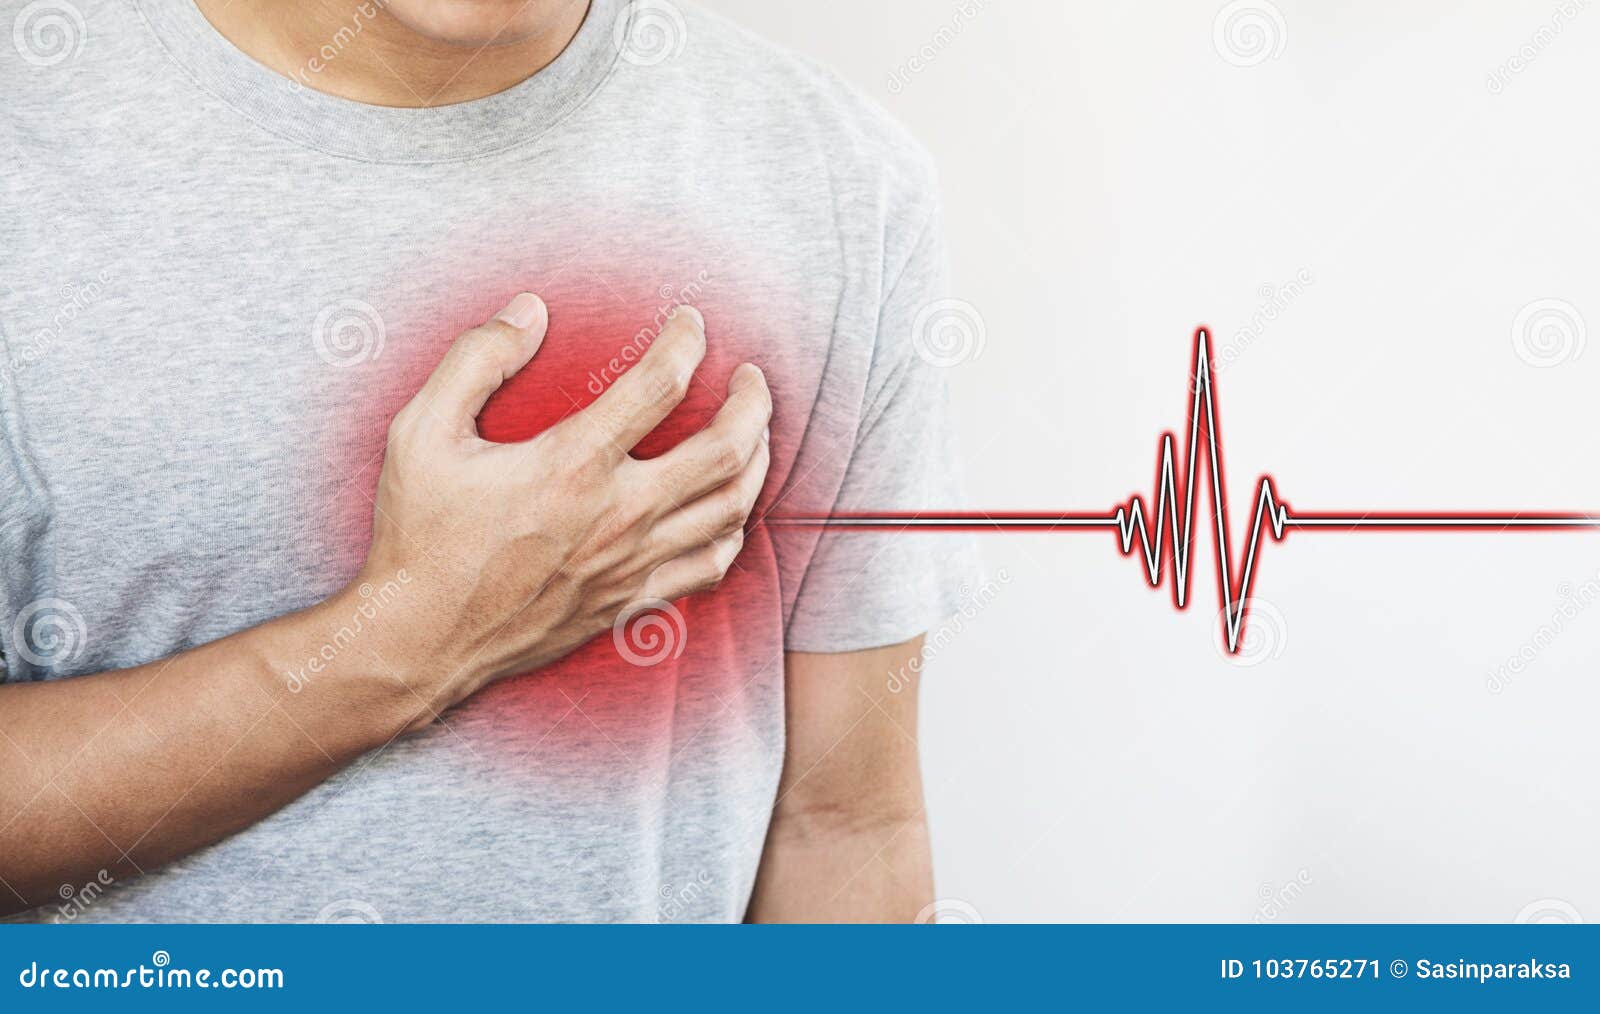 a man touching his heart, with heart pulse sign. heart attack, and others heart disease